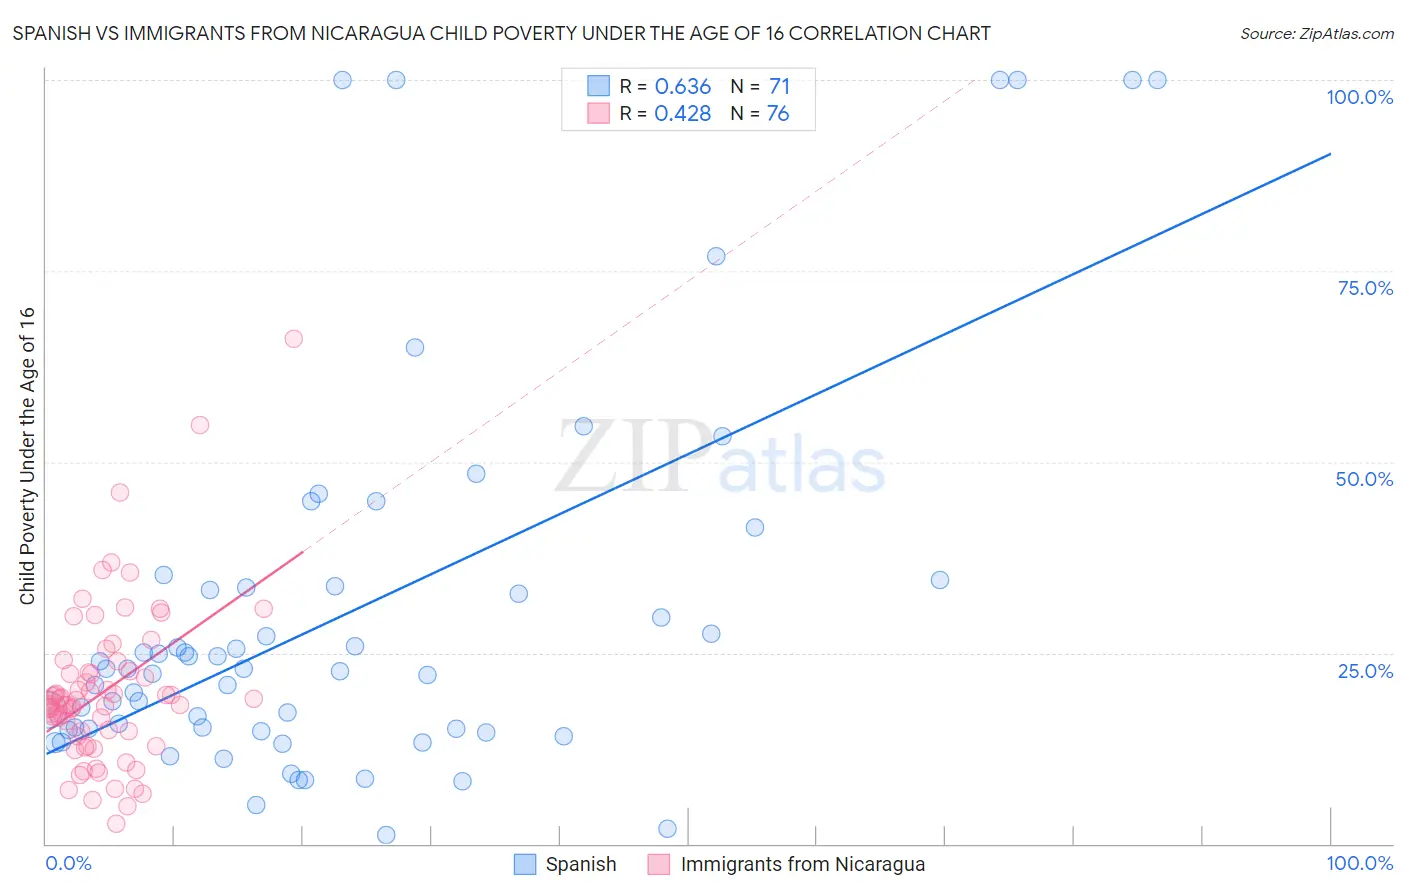 Spanish vs Immigrants from Nicaragua Child Poverty Under the Age of 16